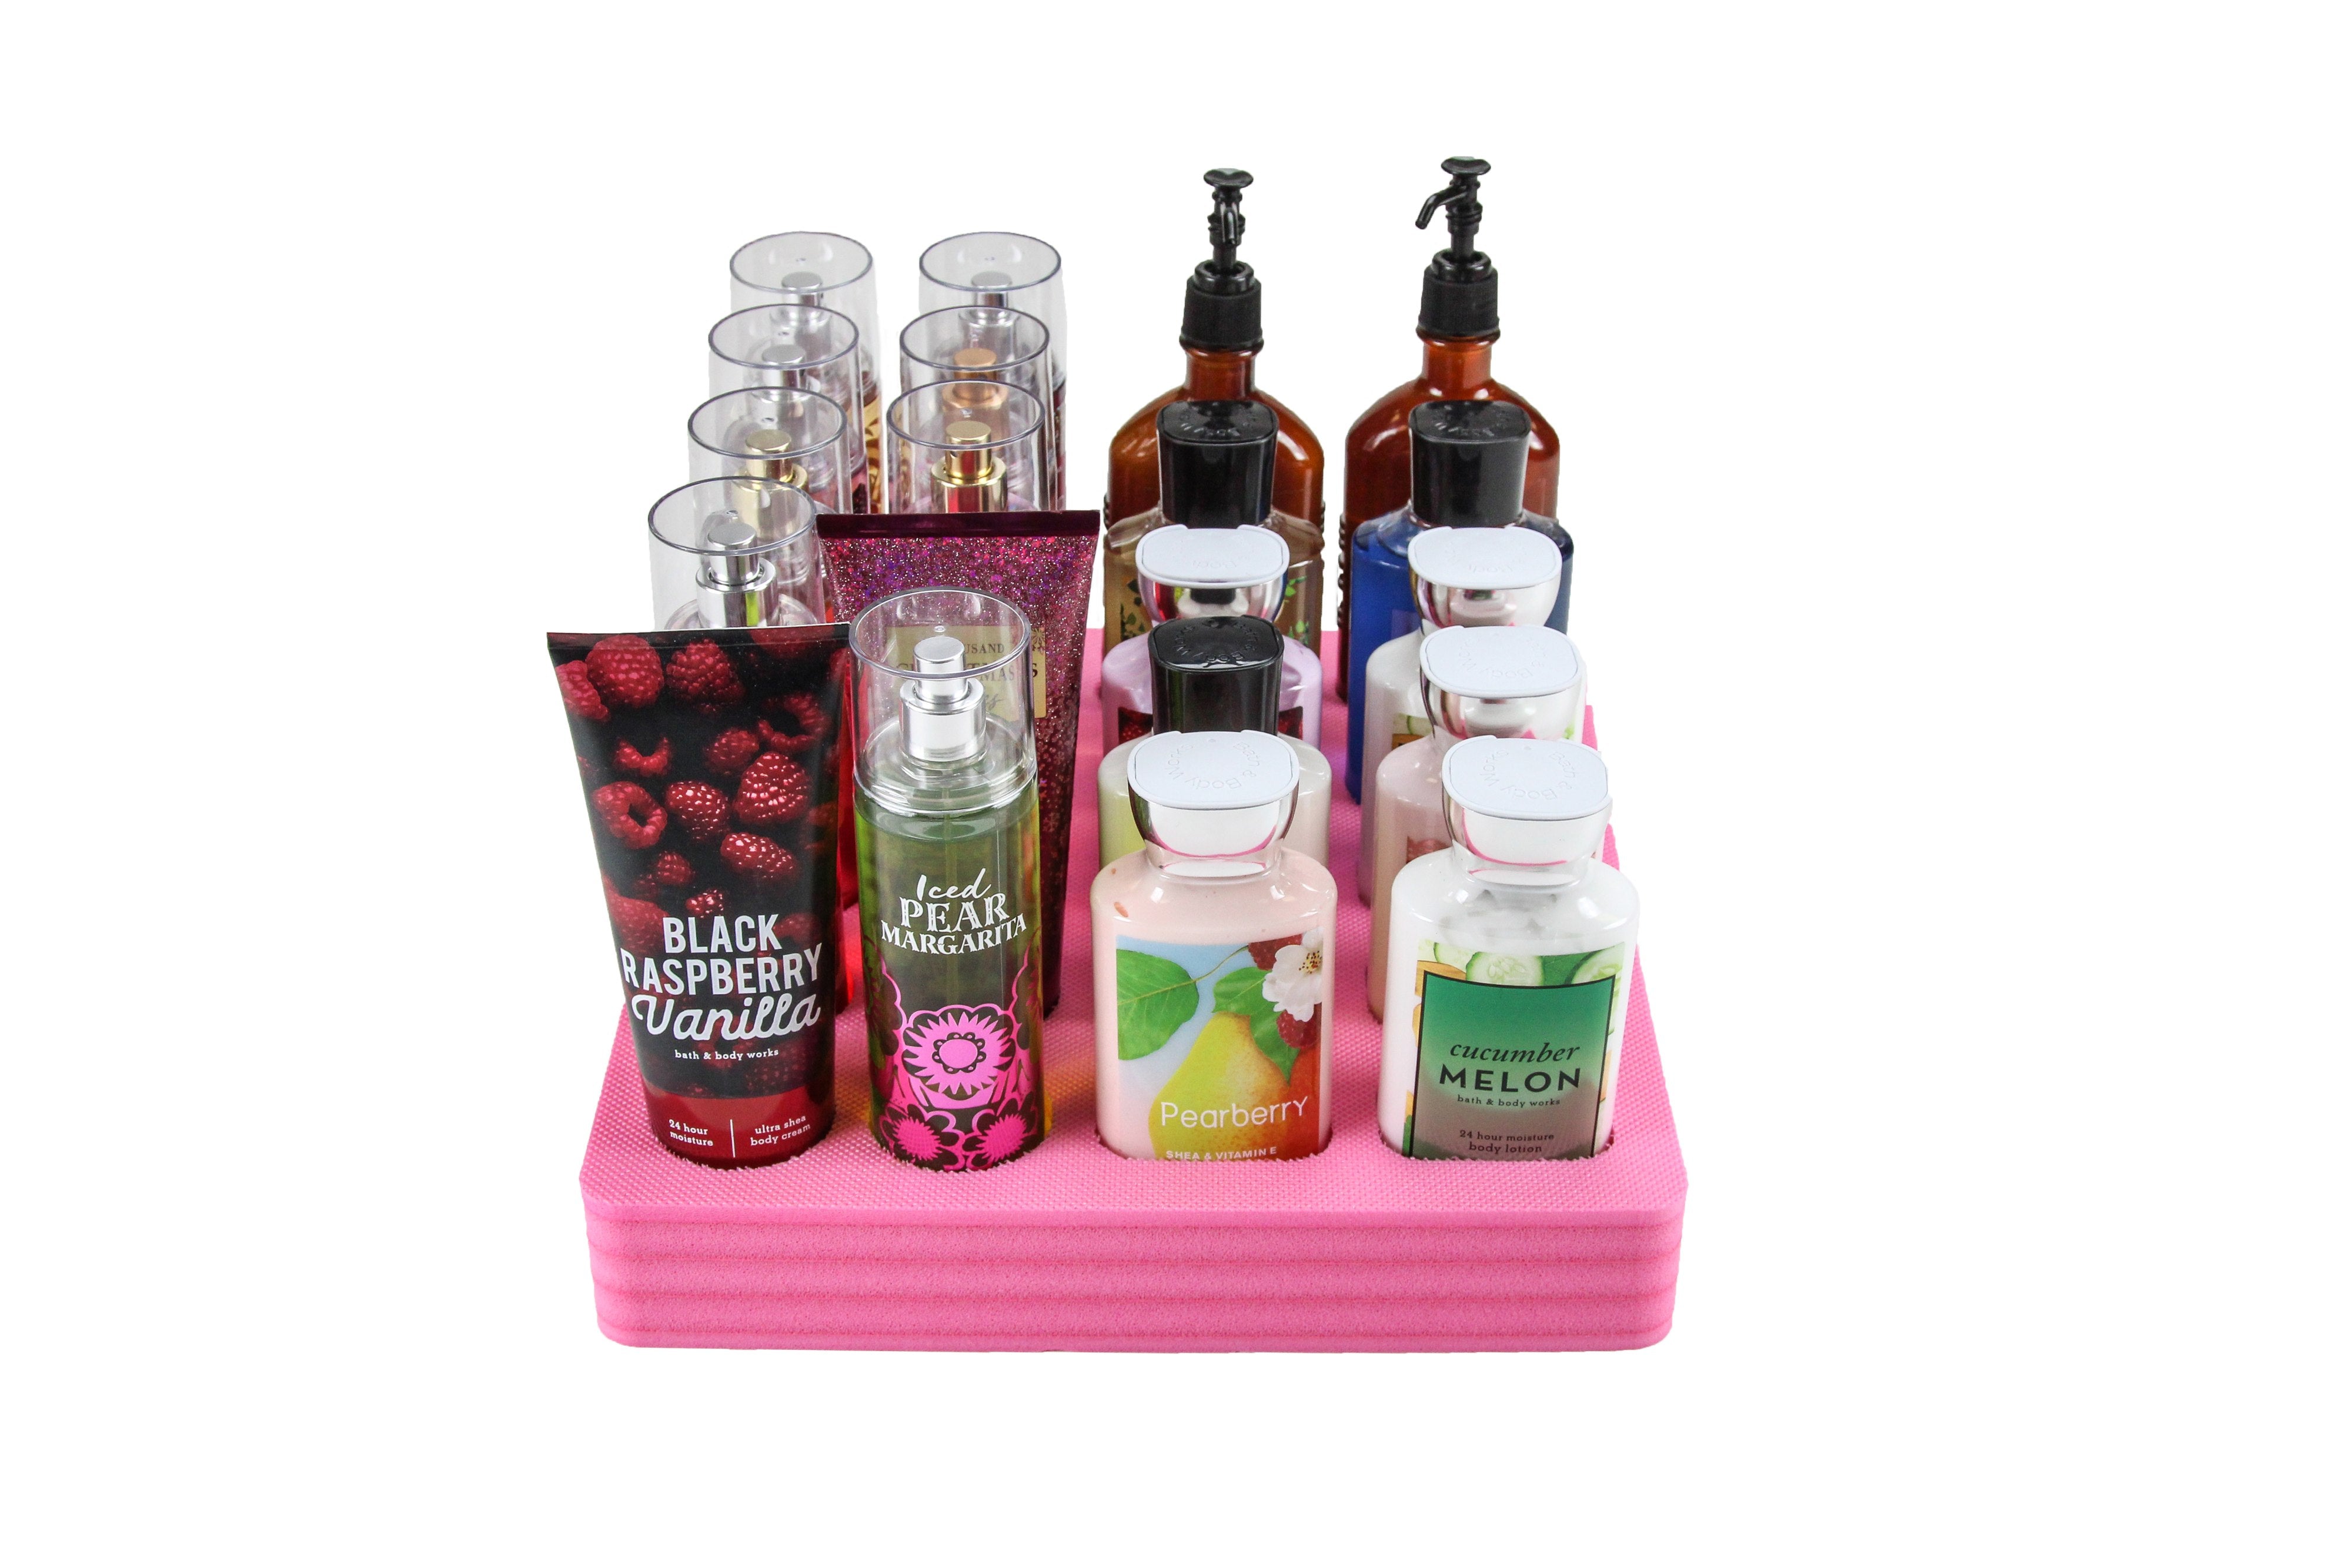 Lotion Body Spray St Organizer Large Tray Durable Foam Washable Waterproof Insert for Home Bathroom Bedroom Office 12.3 x 11.75 x 2 Inches 20 Slots